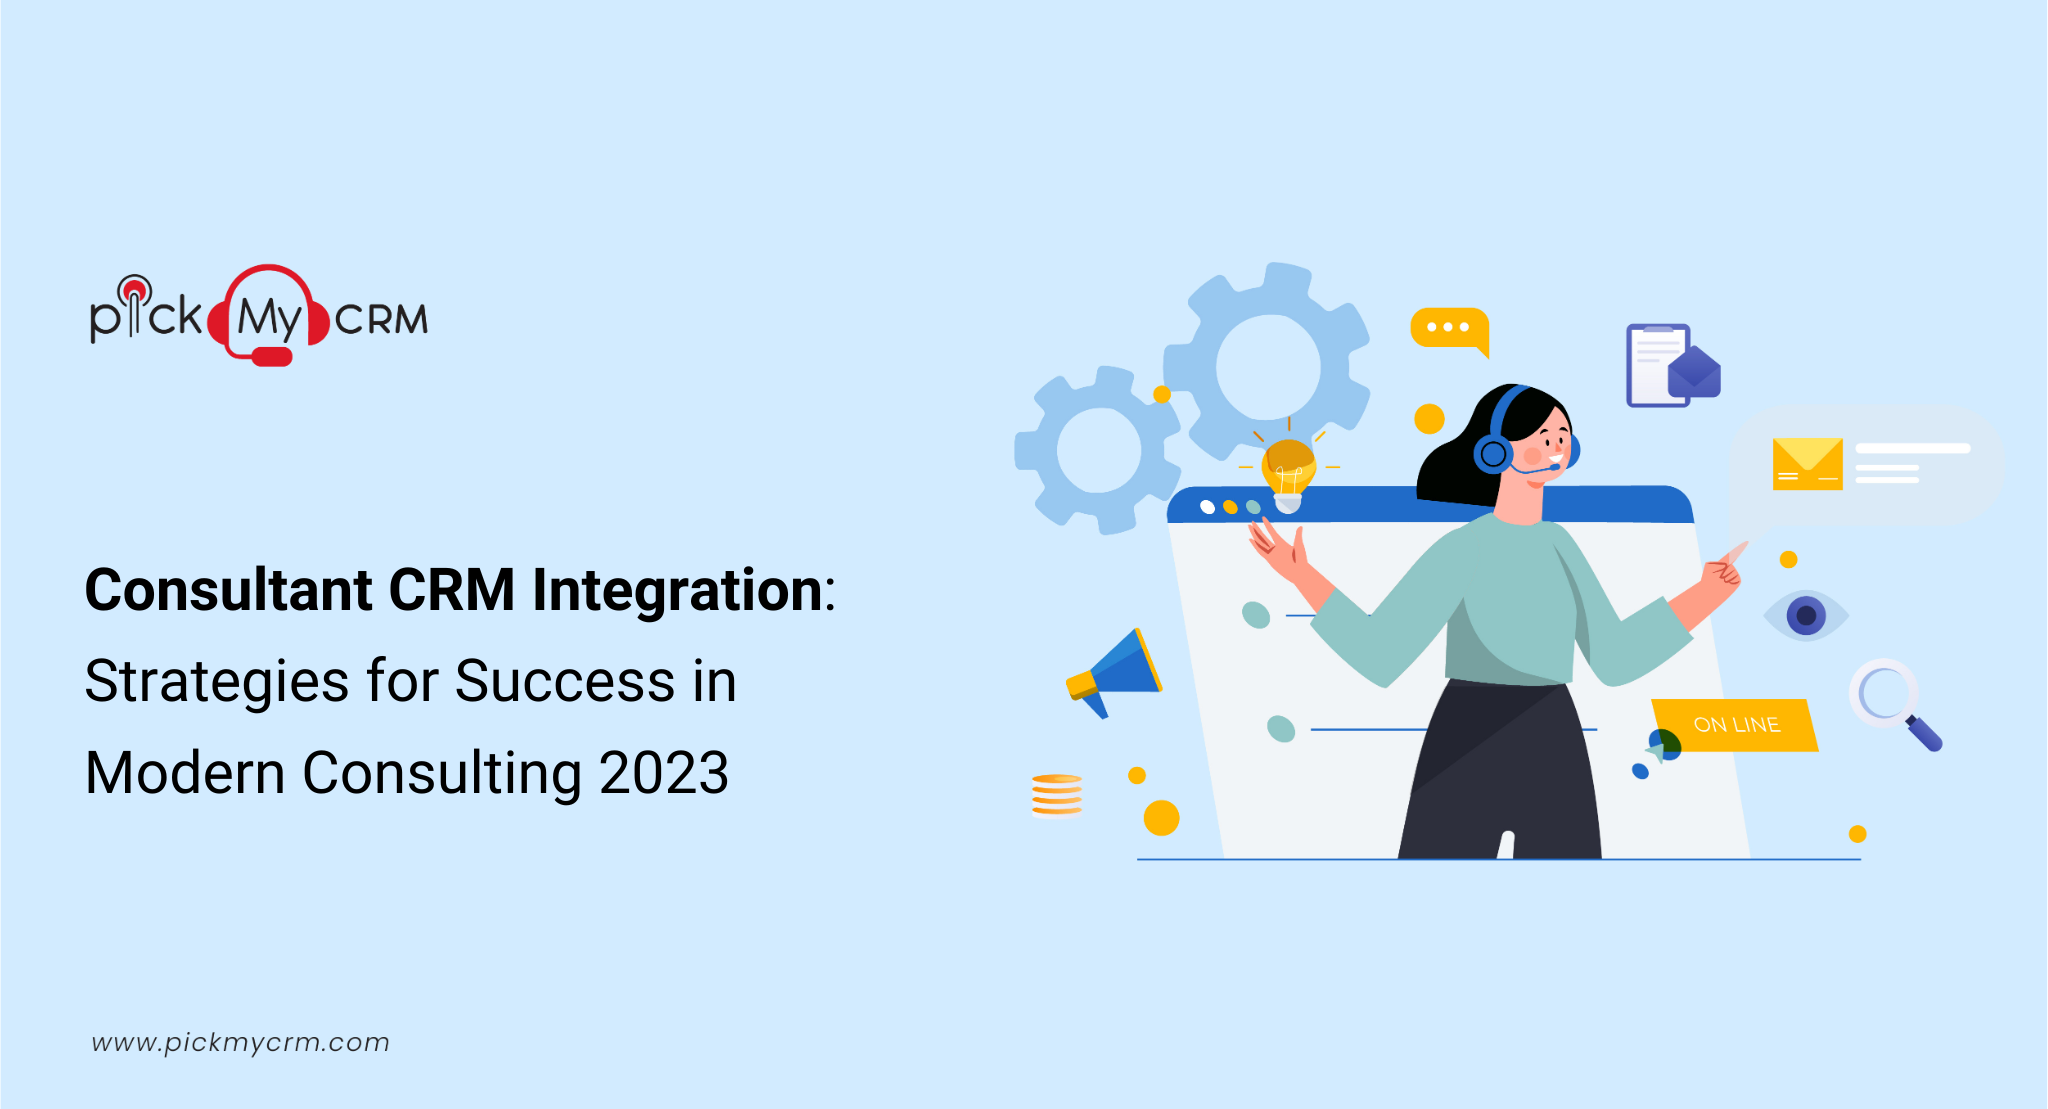 Consultant CRM Integration: Strategies for Success in Modern Consulting